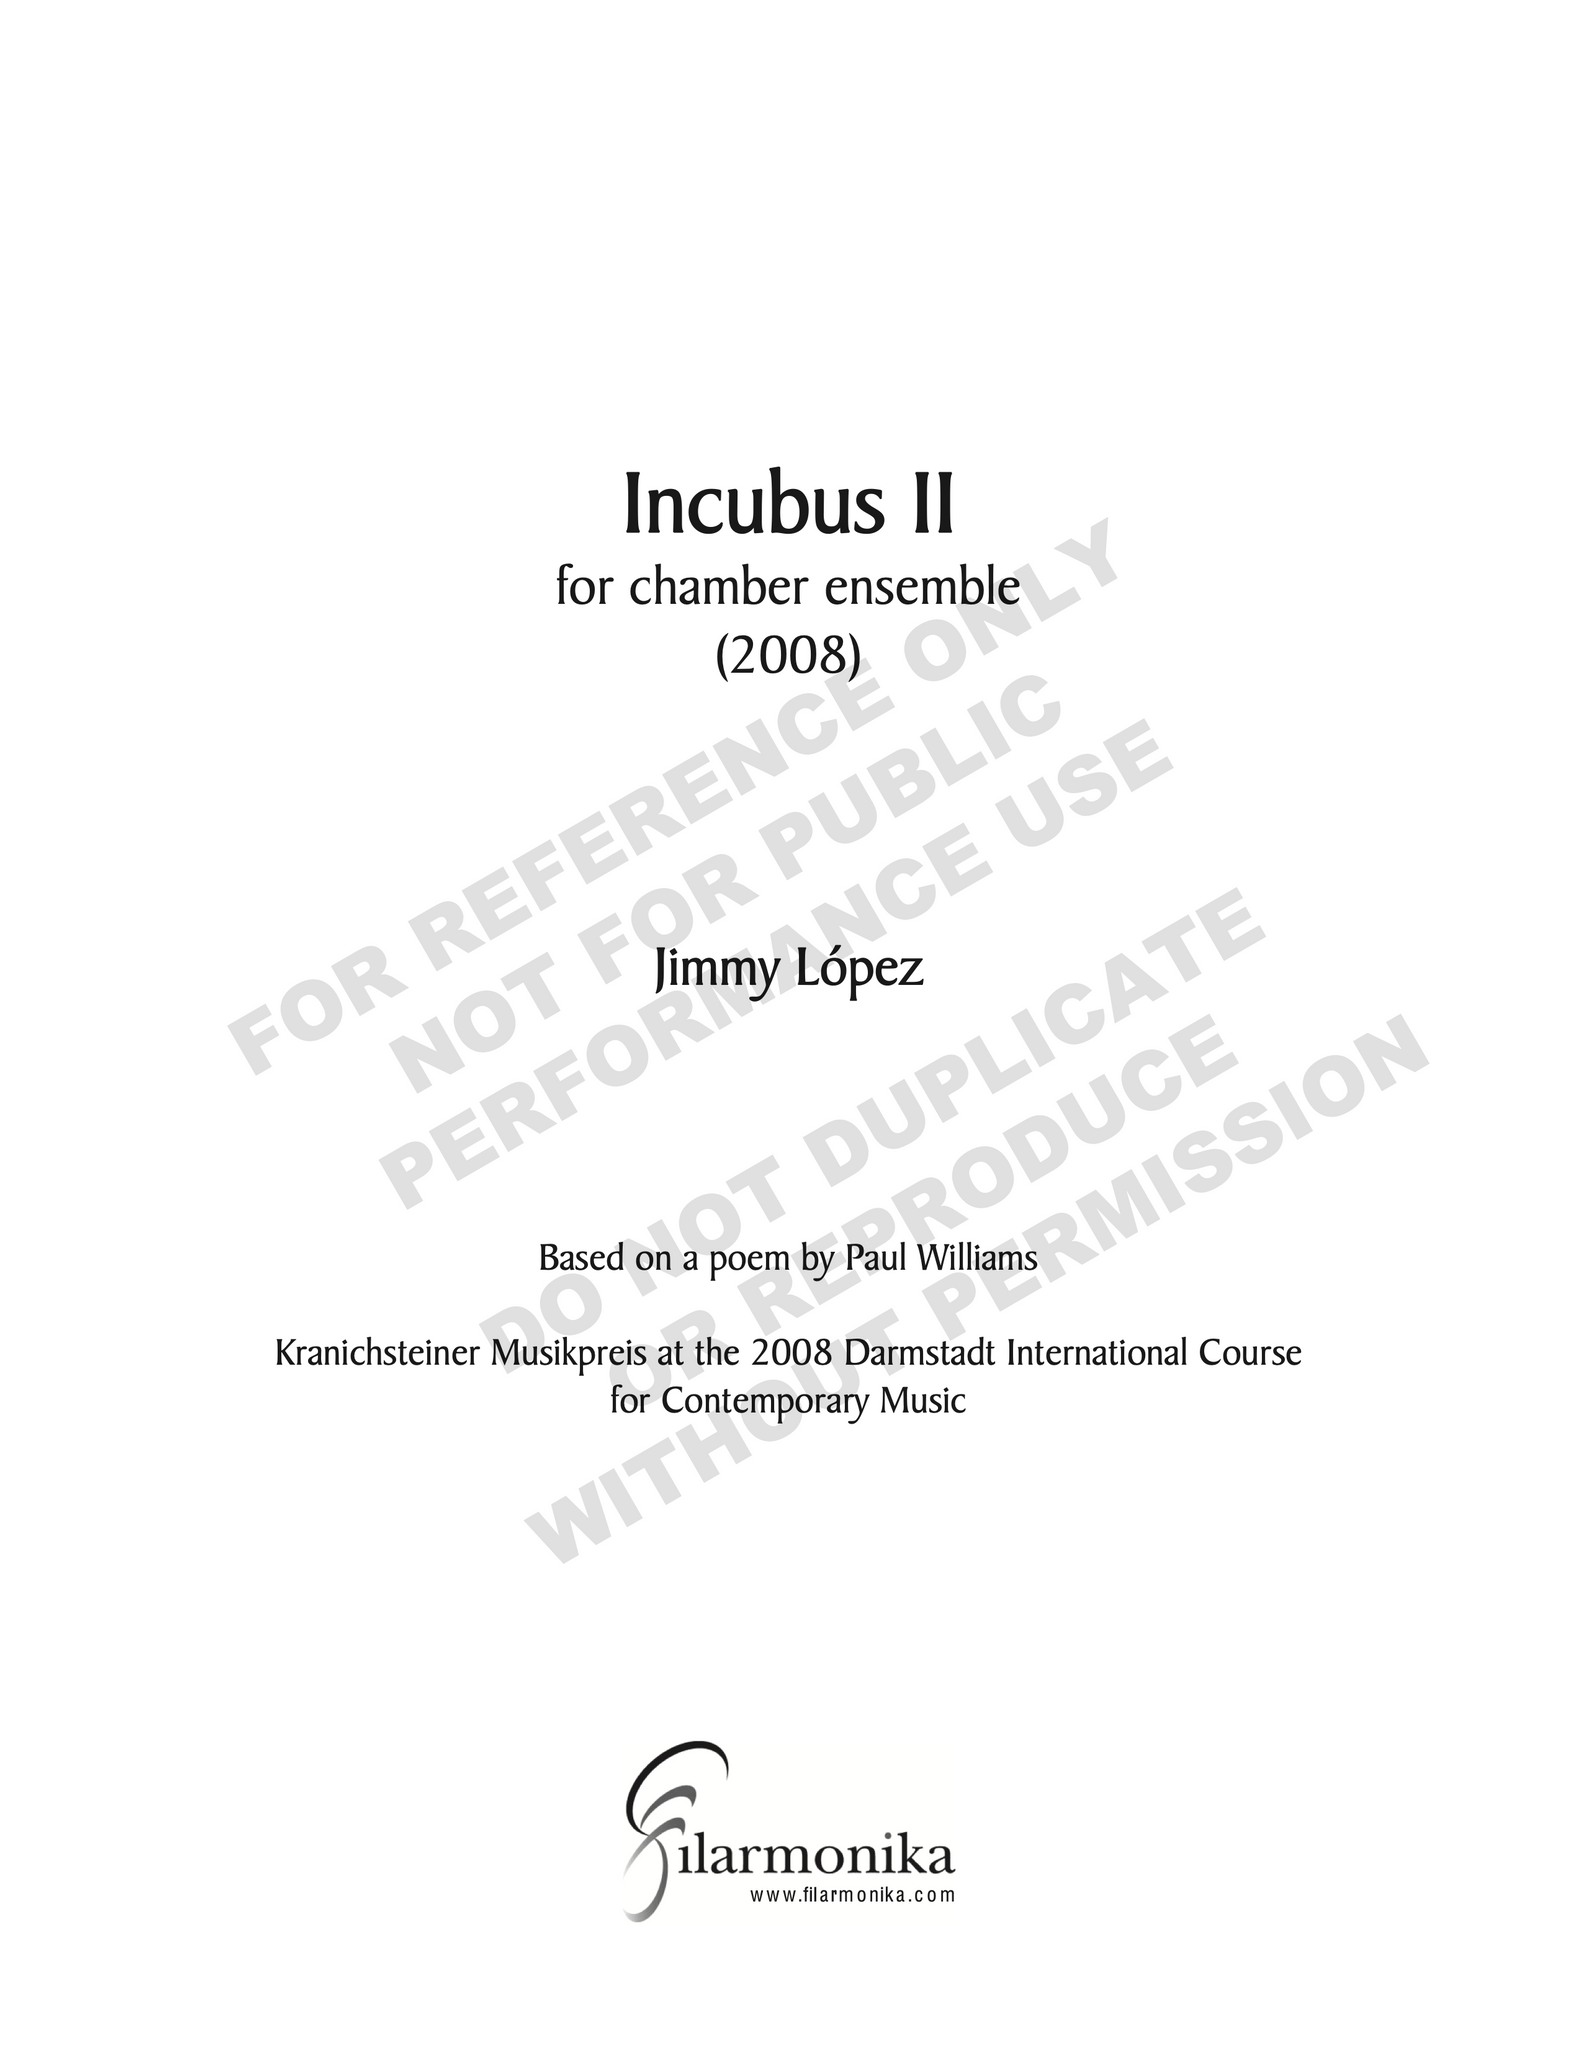 Incubus II, for chamber ensemble